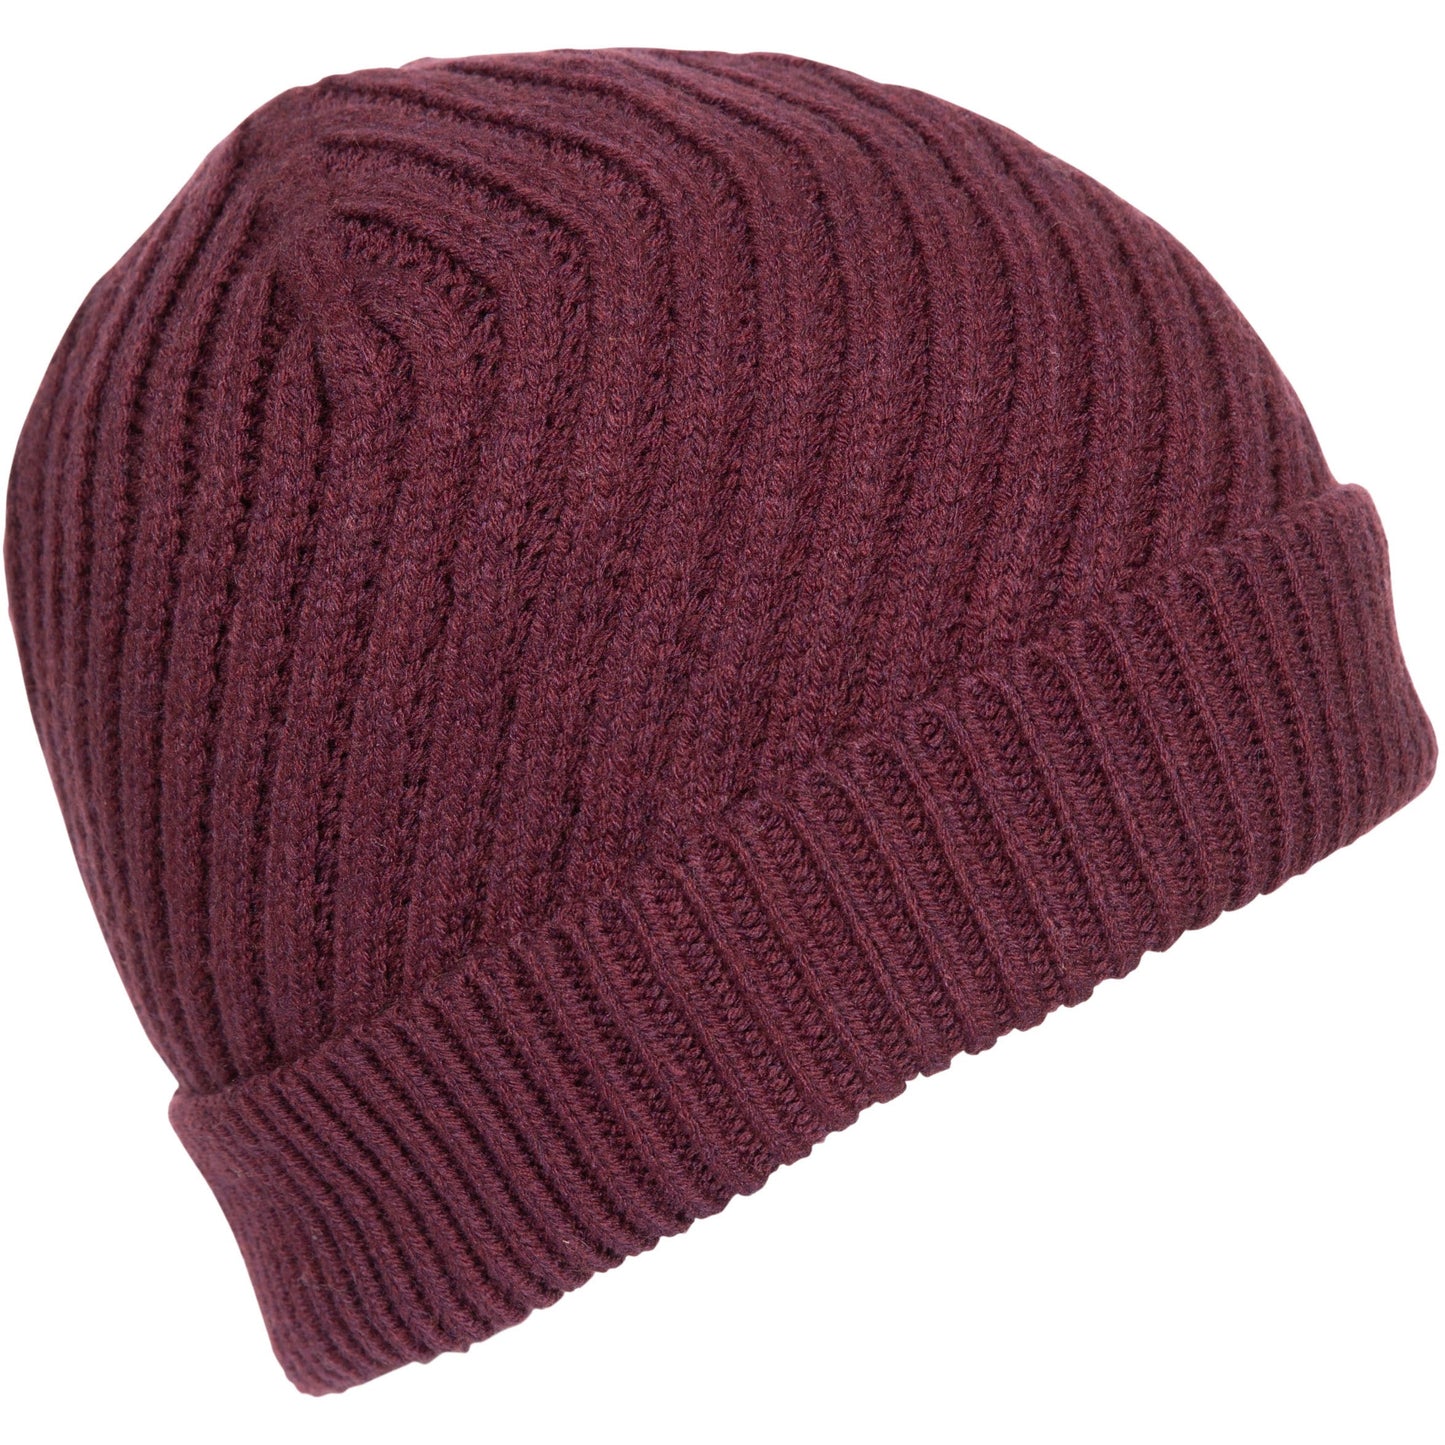 Twisted Womens Knitted Hat in Fig with Fleece Lining